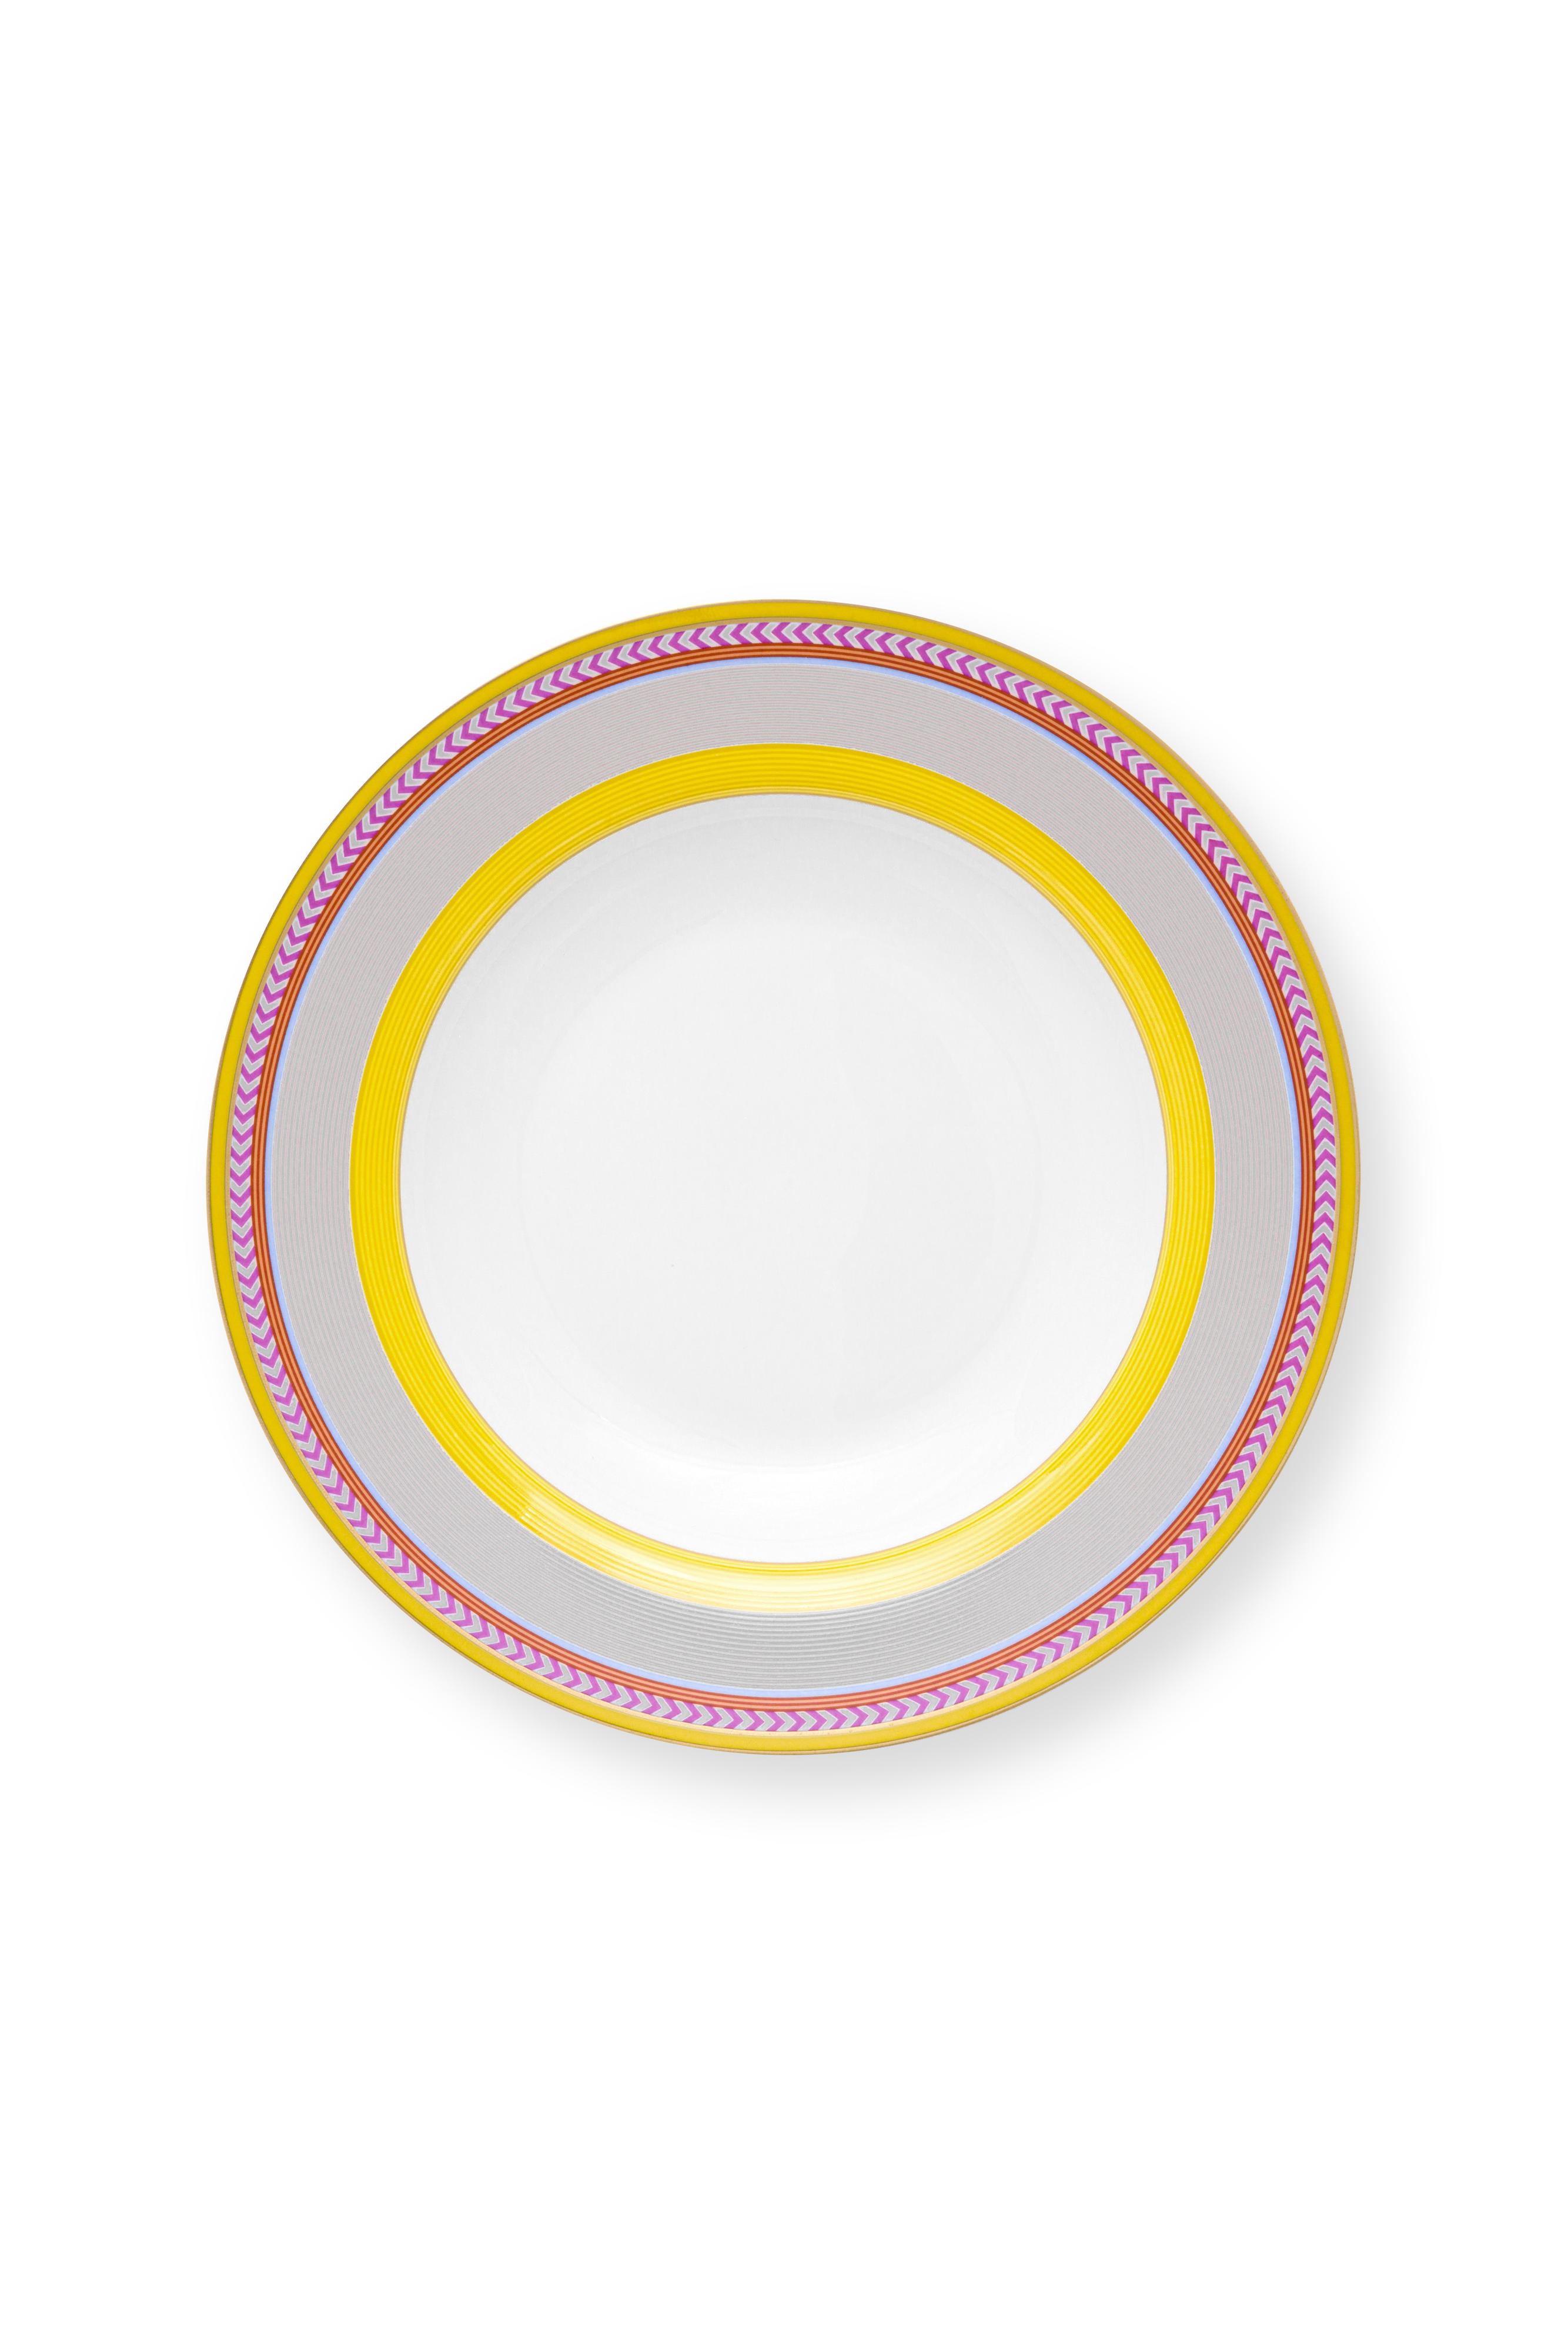 Deep Plate Pip Chique Stripes Yellow 23.5cm Gift